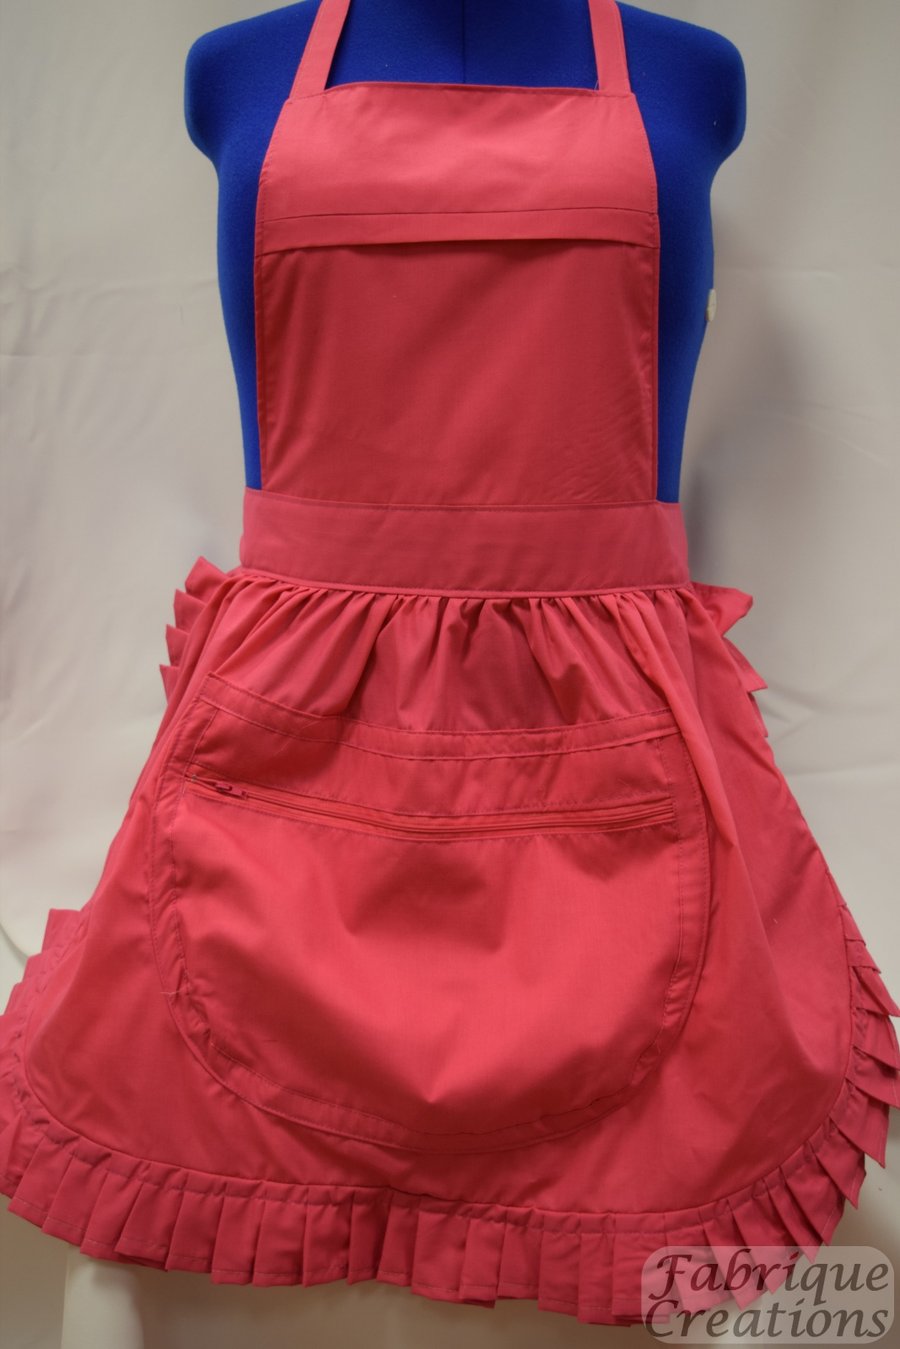 Vintage 50s Style Full Apron Pinny with Large Zipped Pocket - Pink